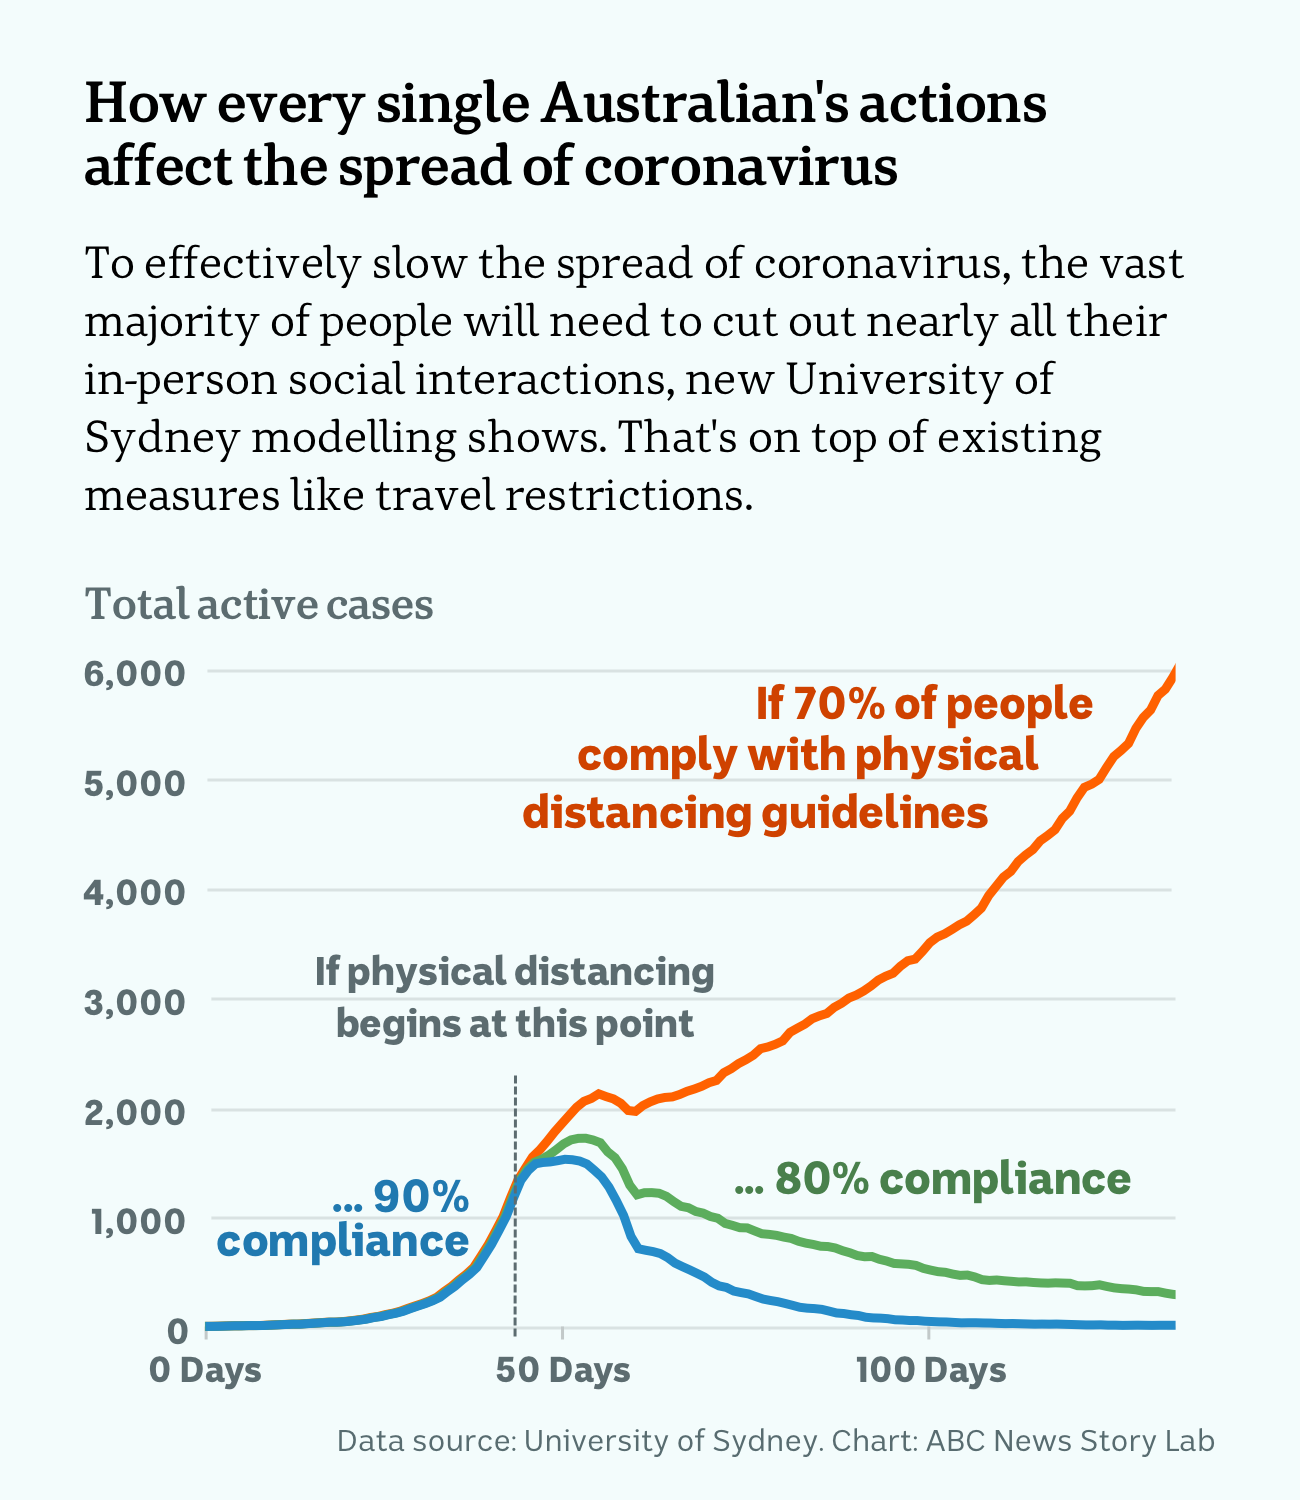 Line chart showing vast majority of people will need to stop nearly all in-person interactions to control coronvirus